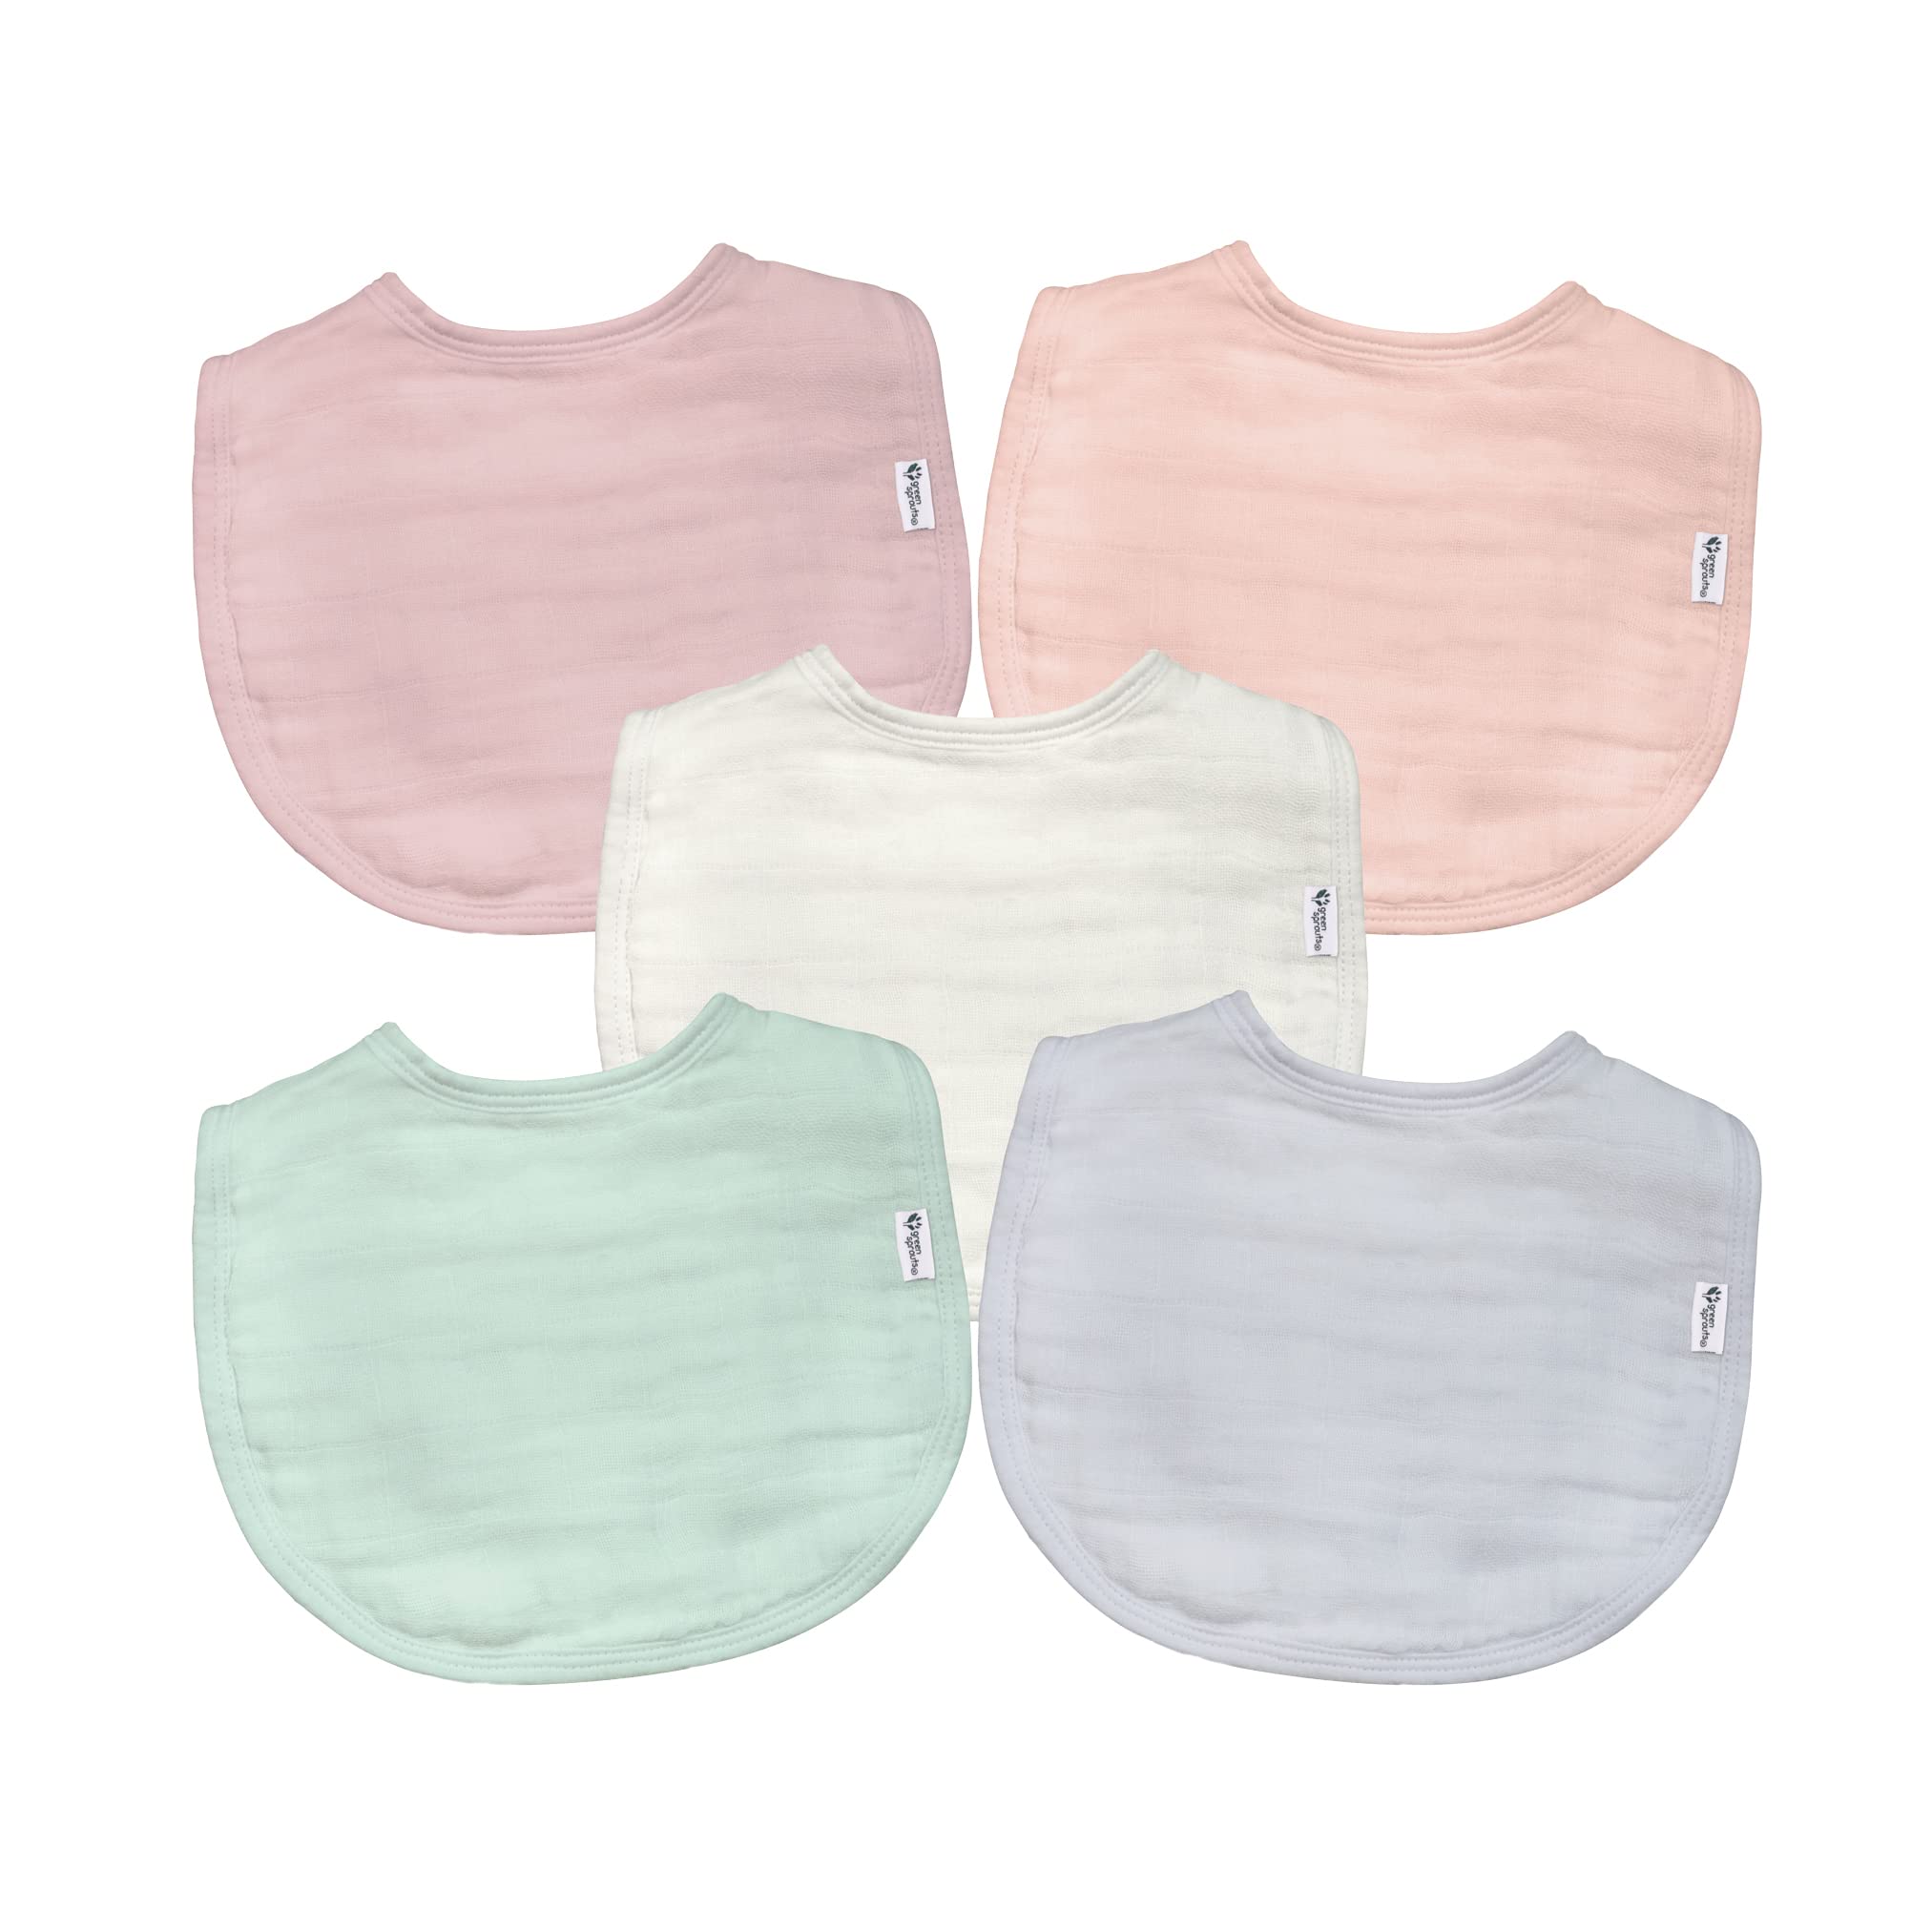 Green Sprouts Unisex Baby Adjustable Bib, Rose, Small US